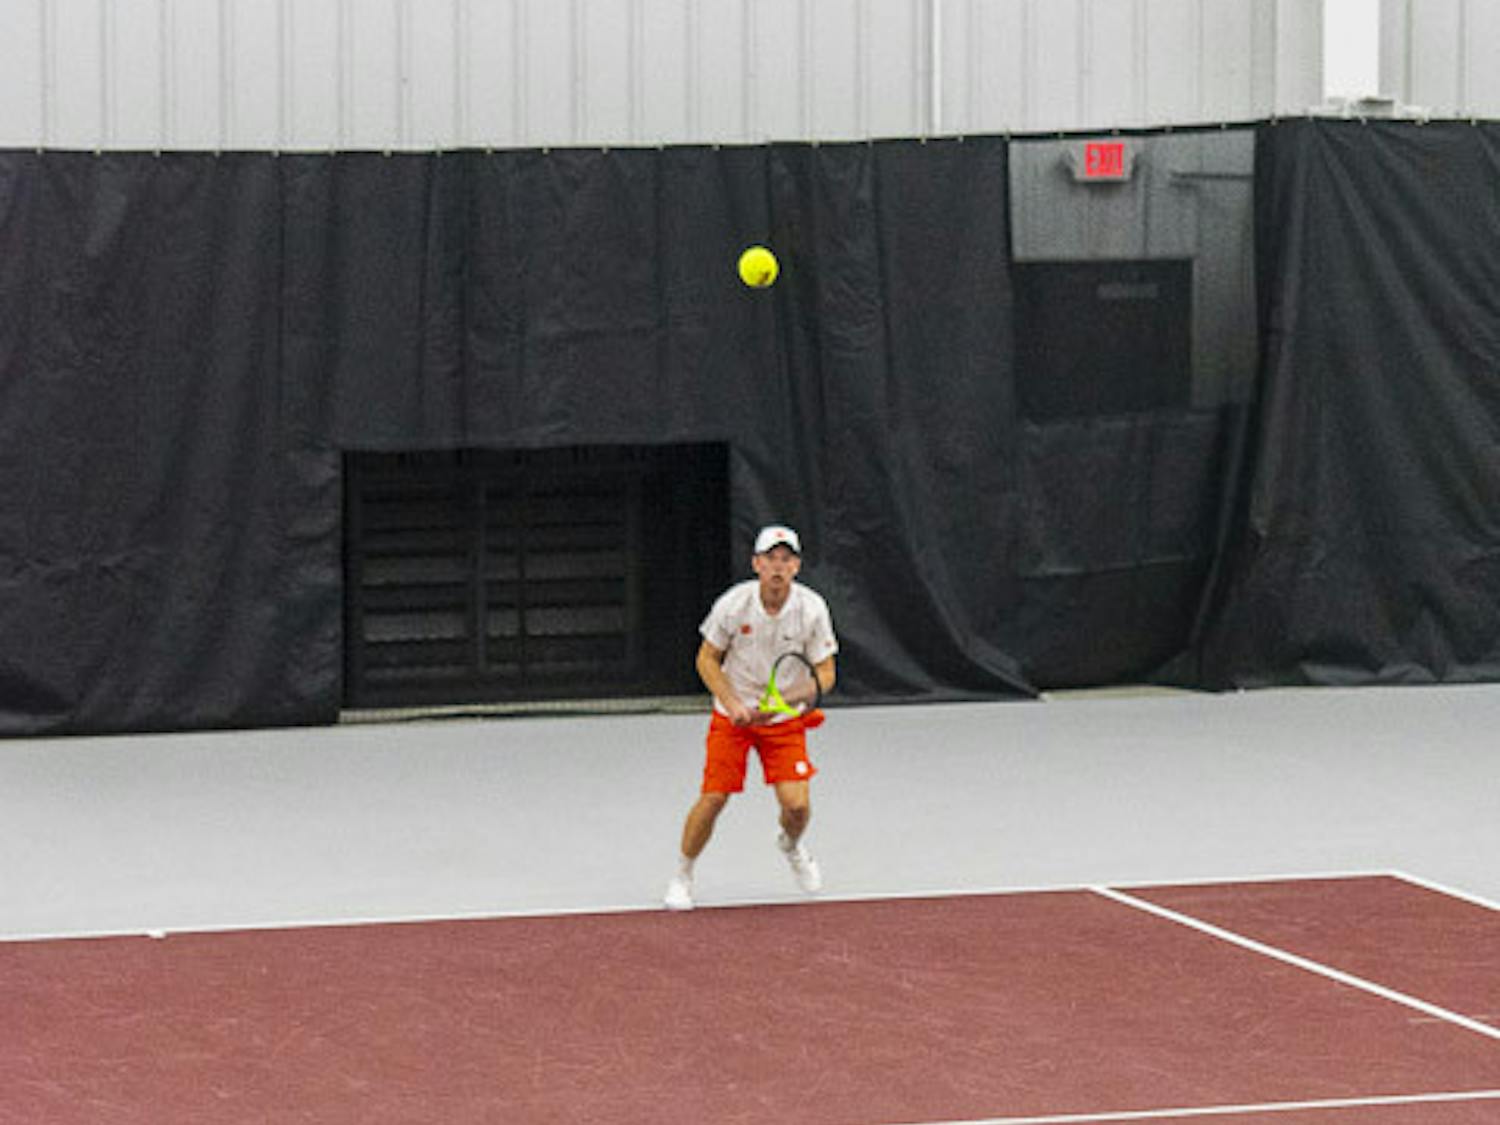 Junior Connor Thomson serves the ball over to his Clemson opponent during a doubles tournament at the Carolina Indoor Tennis Facility on Feb. 3, 2022. The Gamecocks beat the Tigers 7-0, marking the third consecutive year South Carolina has claimed the matchup.